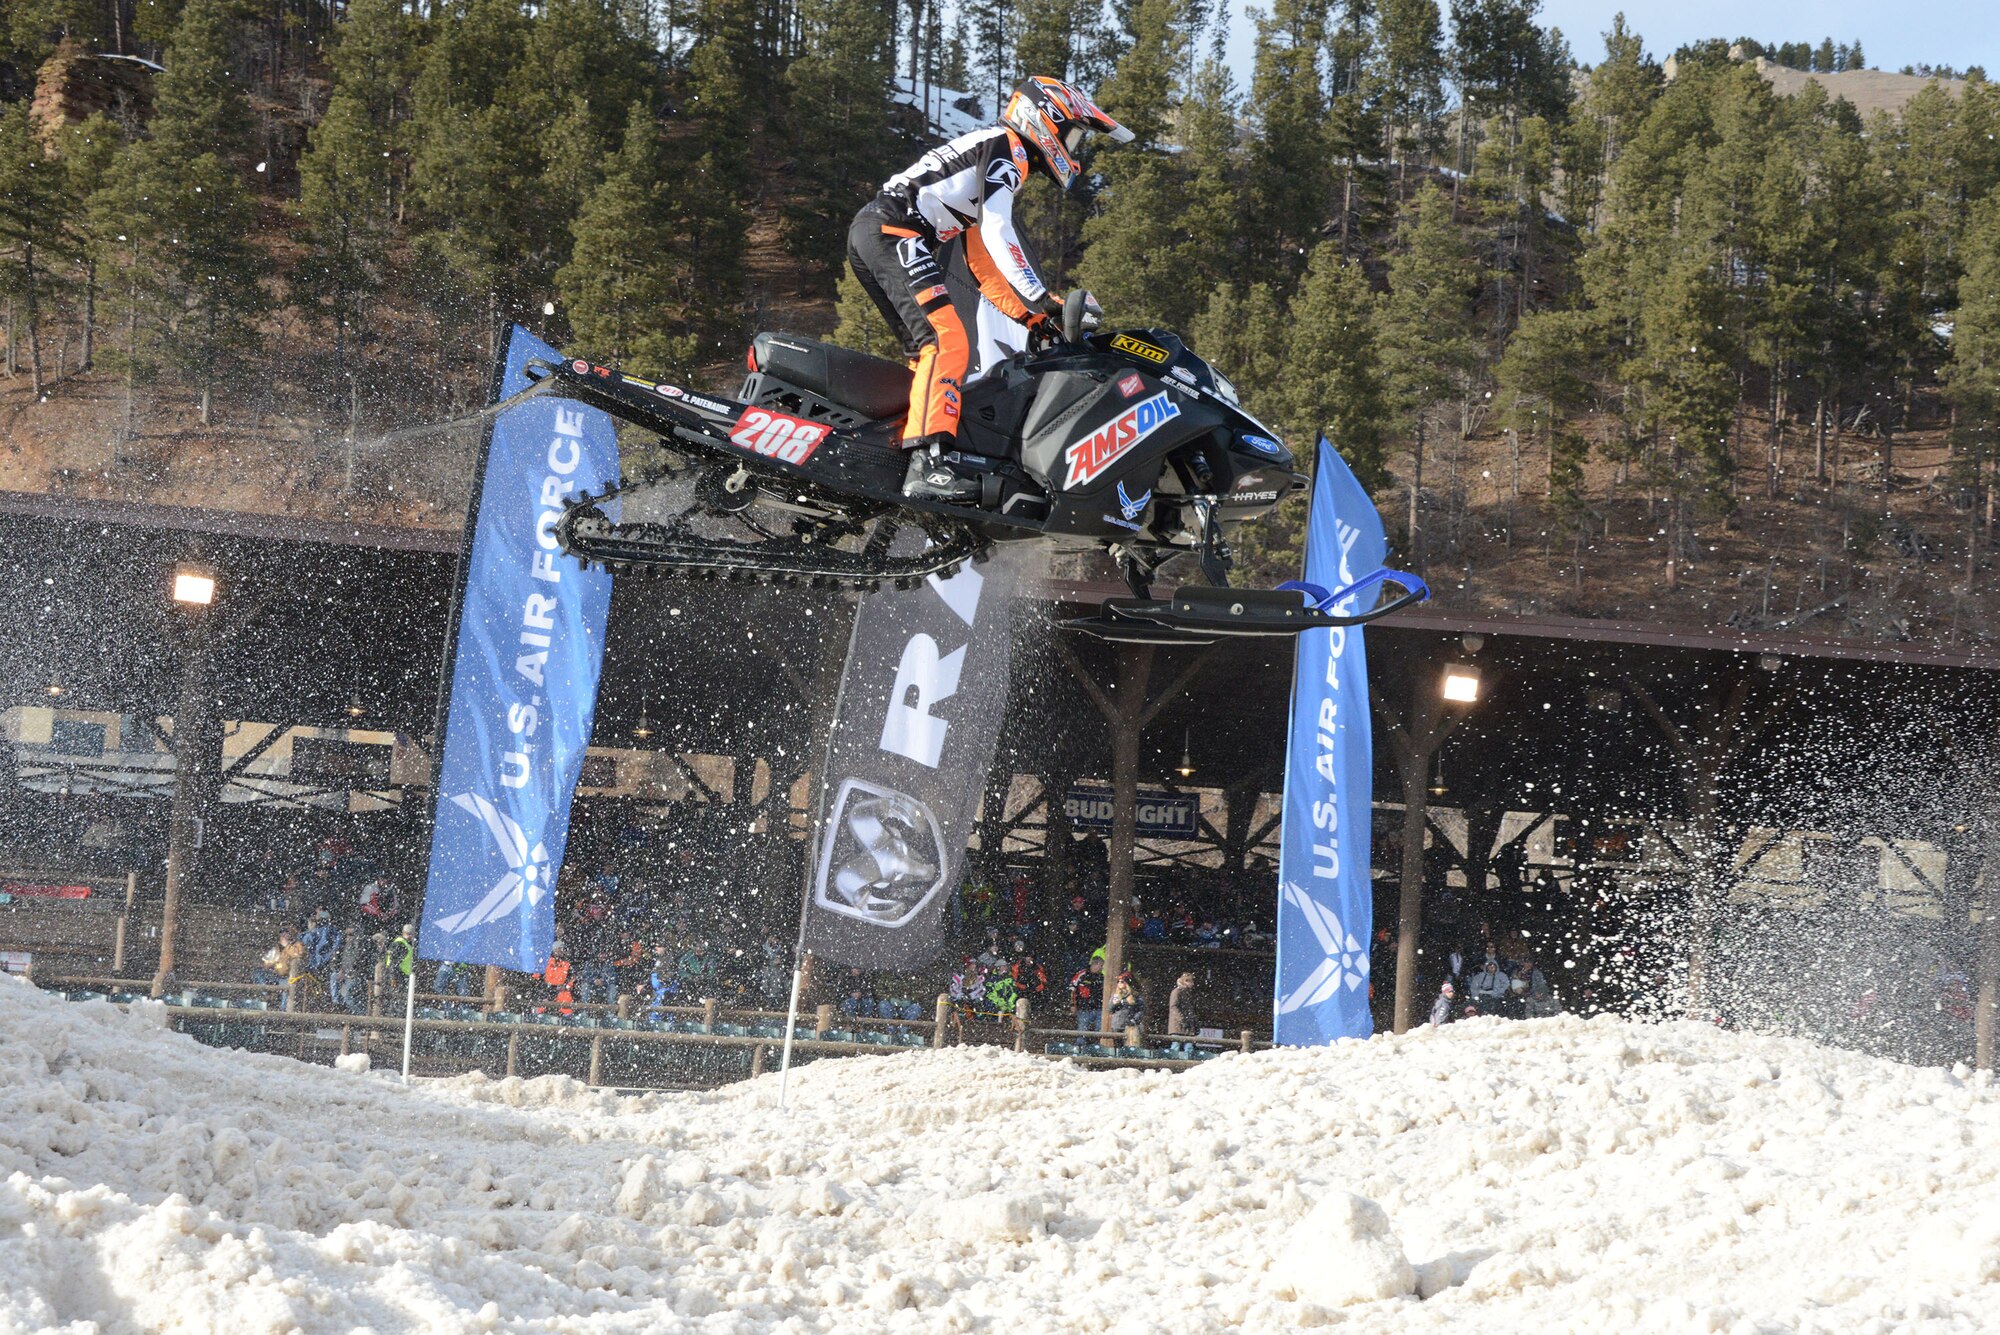 Air Force sponsored Snocross driver Lincoln Lemieux gets some serious air during qualifying for the U.S. Air Force Snocross National in Deadwood, South Dakota.